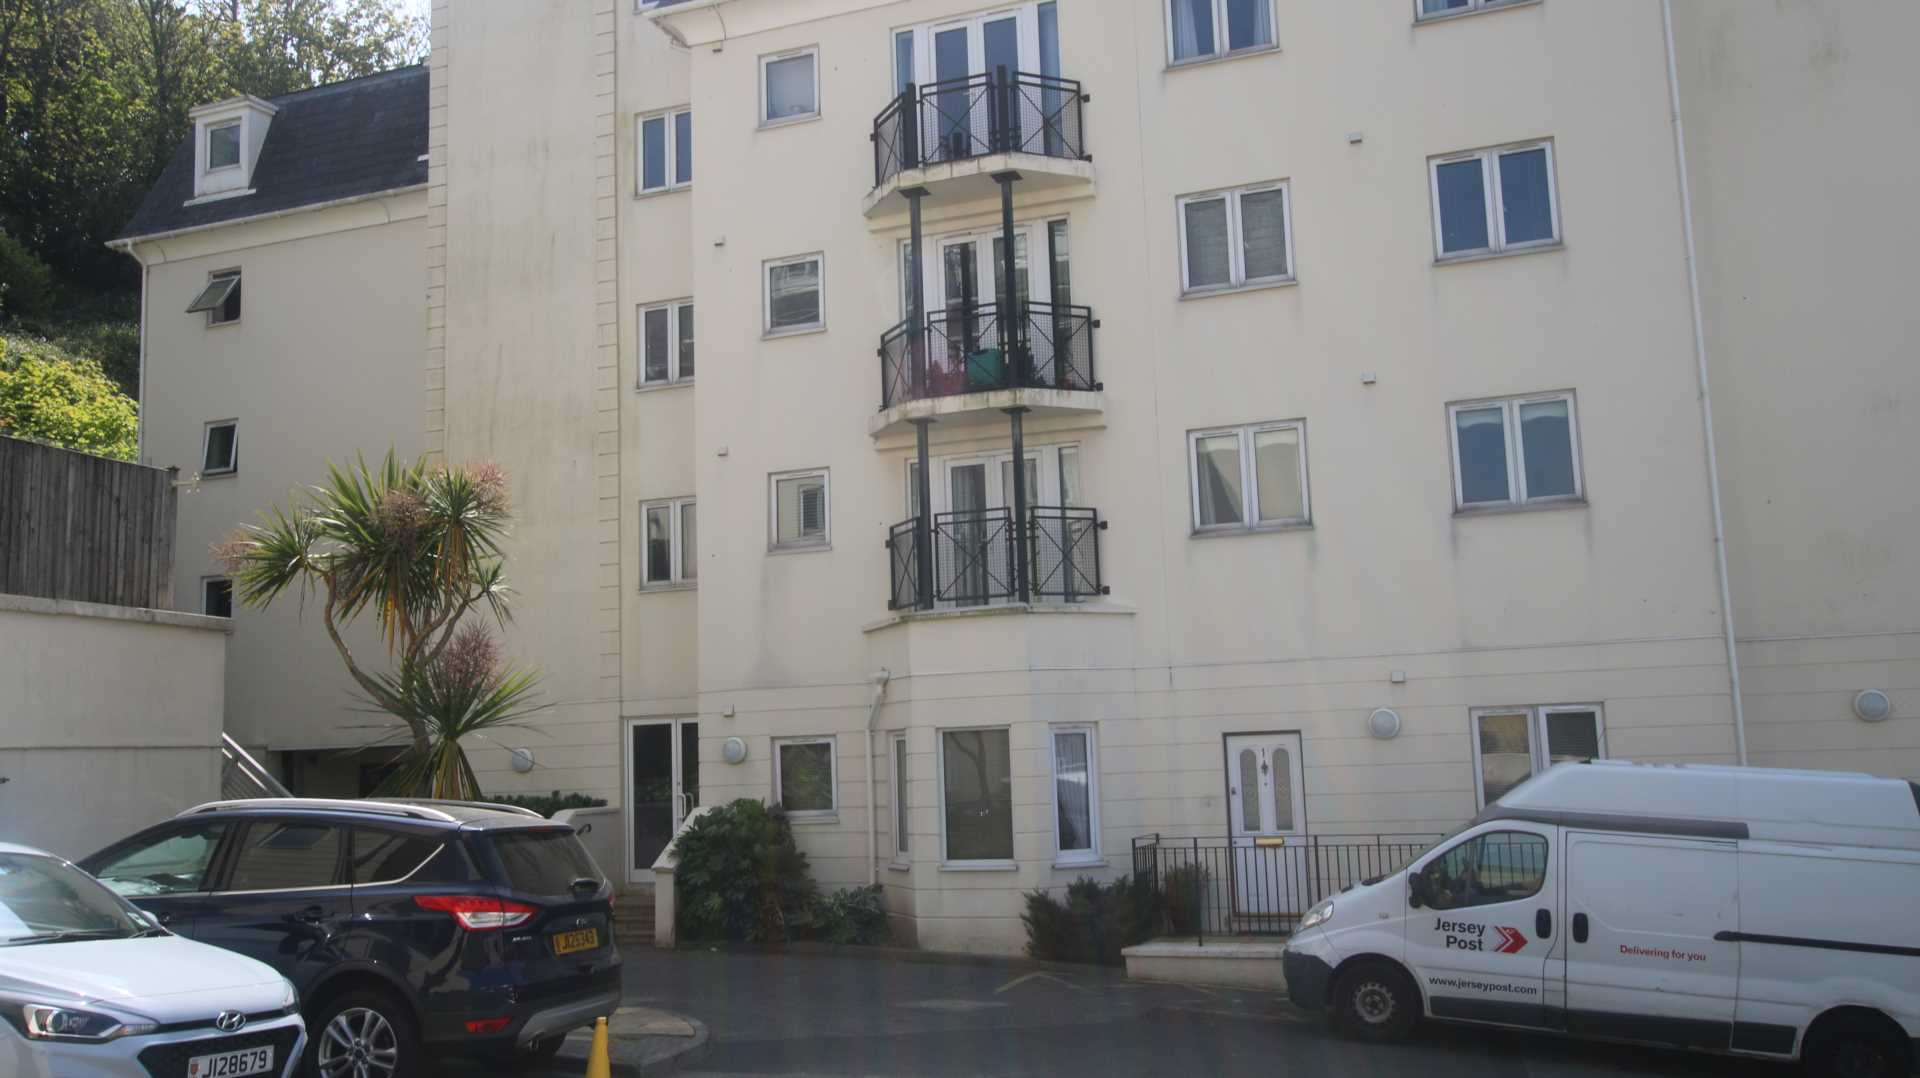 2 bedroom apartment First Time Buyers delight, Light Bright and Airy ample storage plus parking pets welcome, Image 1